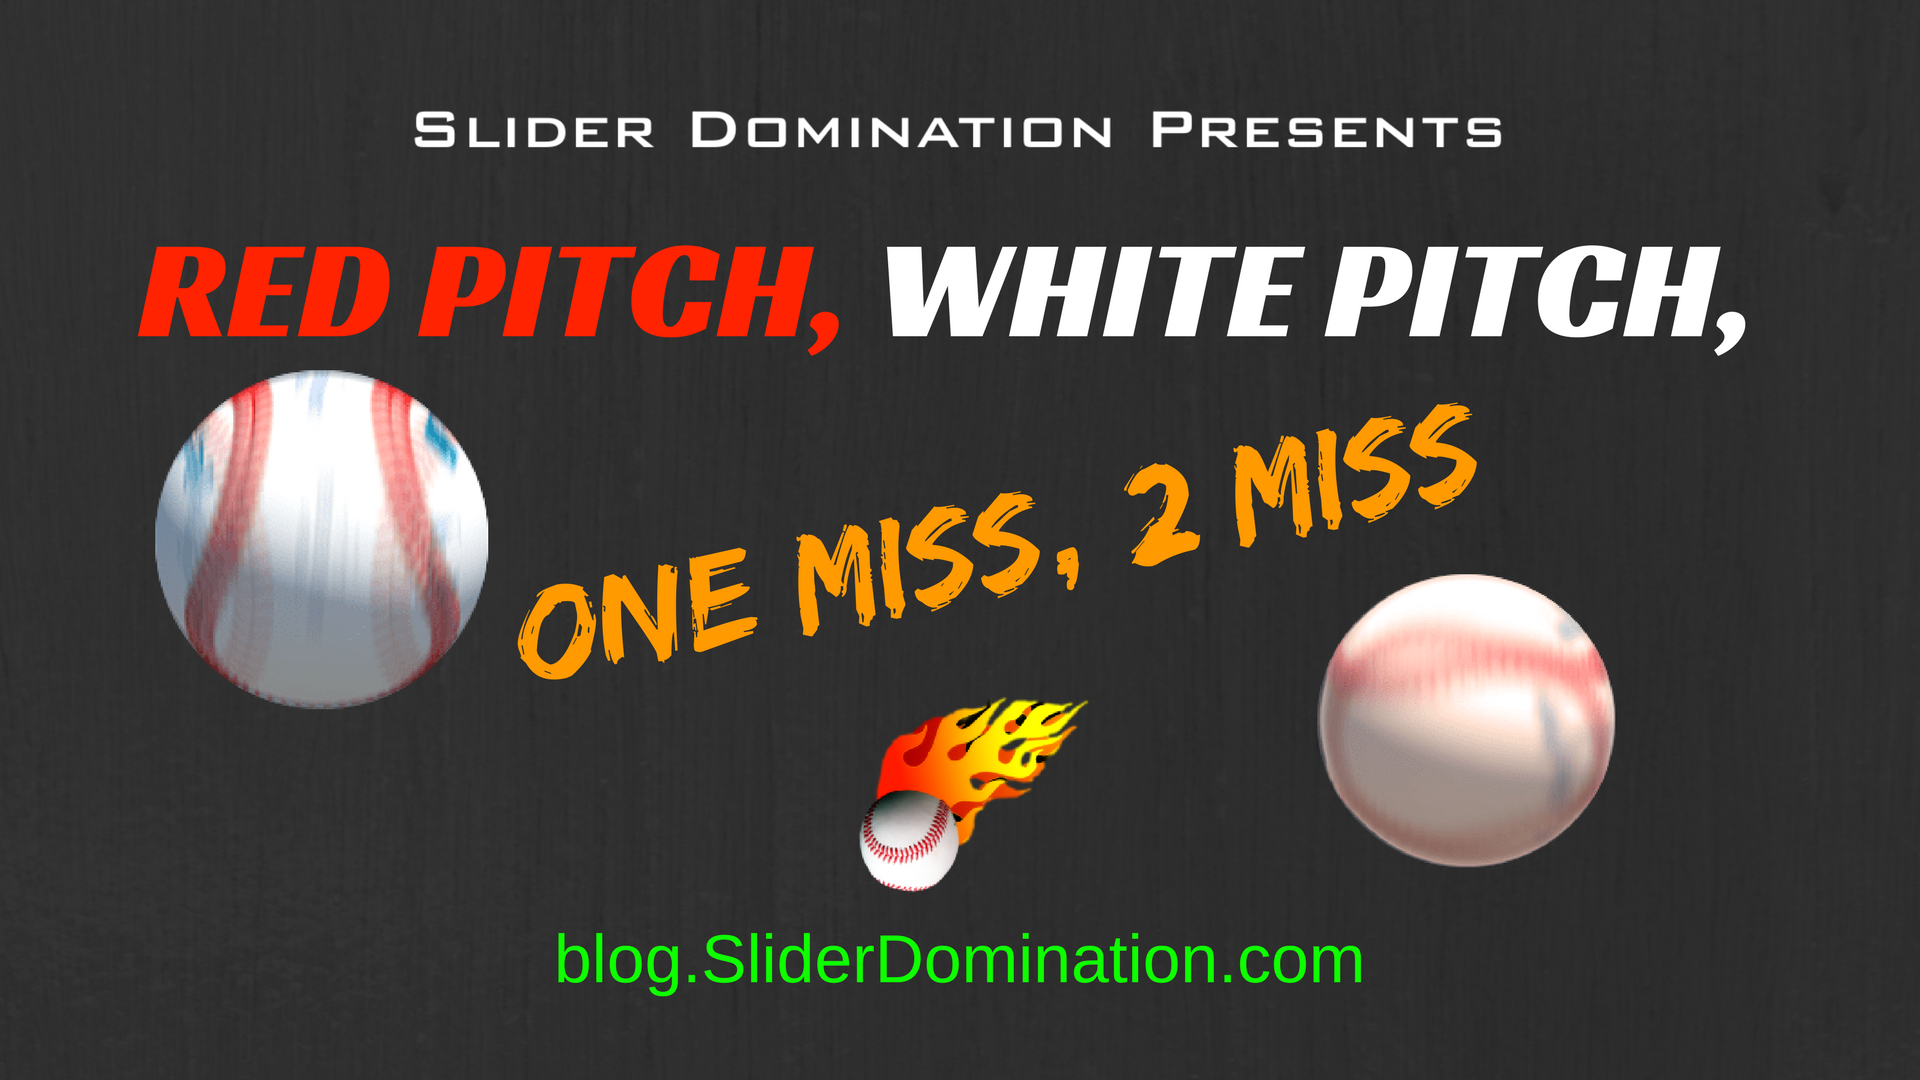 RED PITCH, WHITE PITCH,